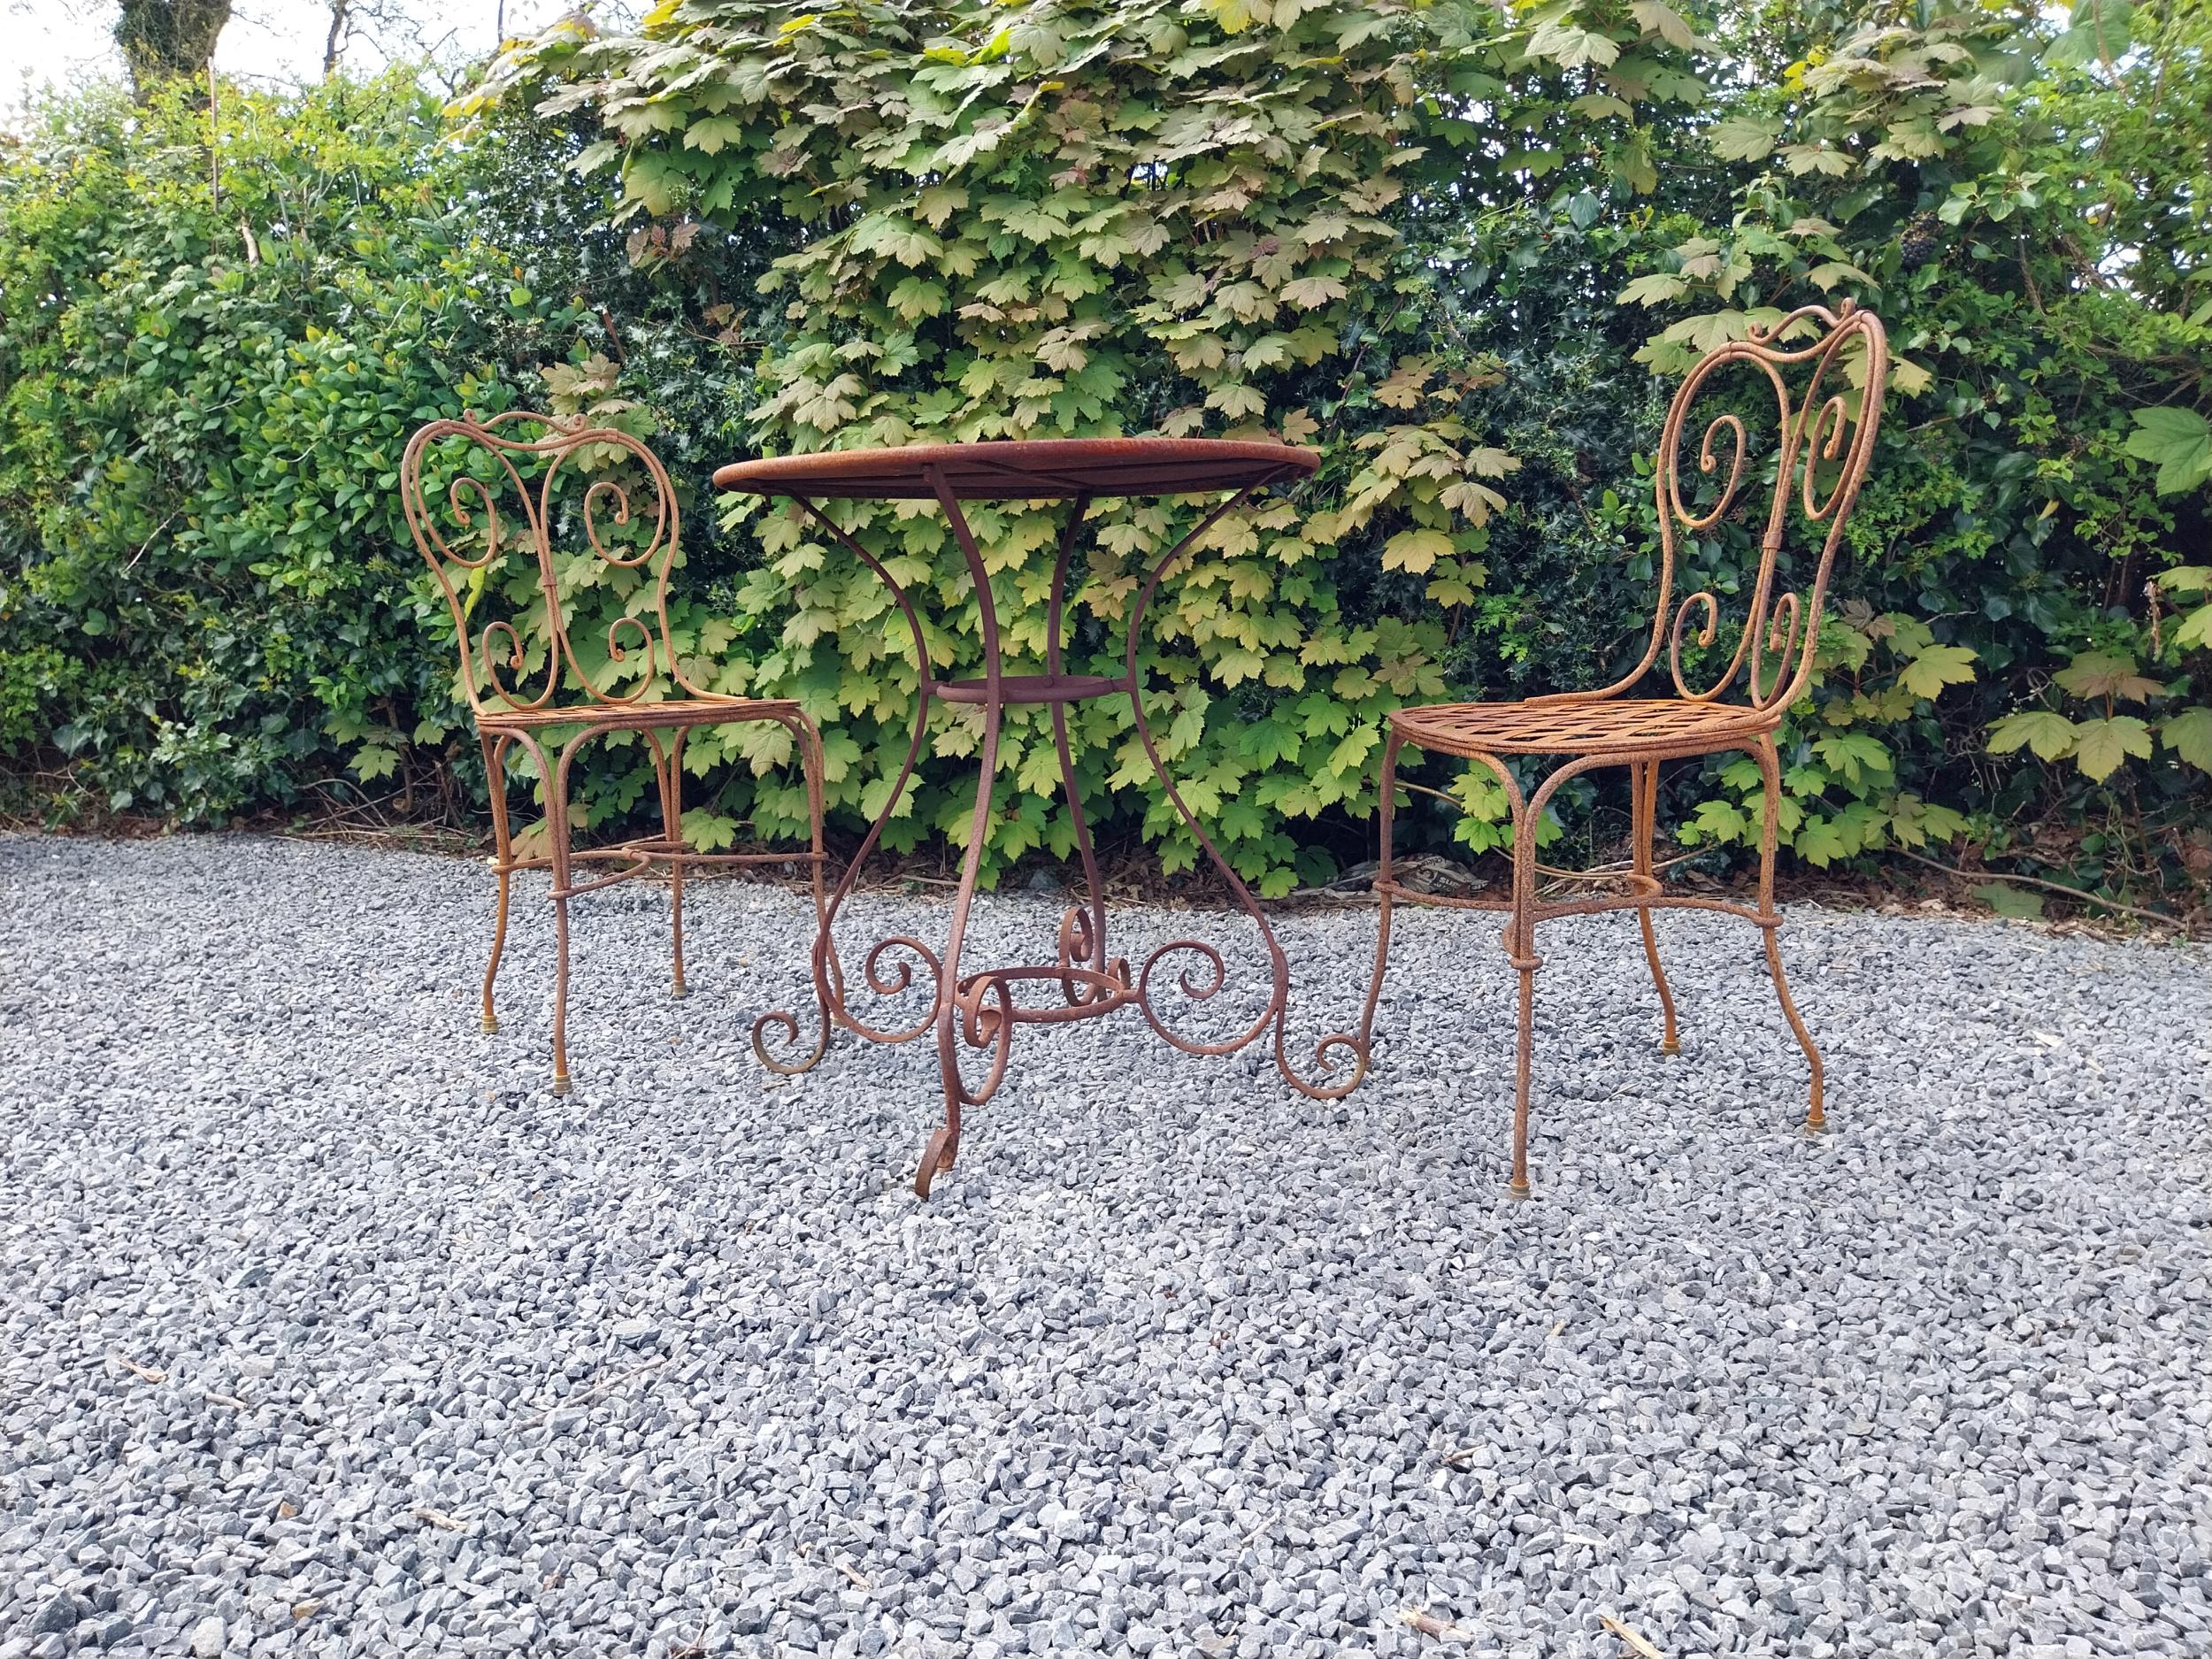 Wrought iron café - garden circular table with two matching chairs {Tbl. 75 cm H x 70 cm Dia. Chairs - Image 4 of 10